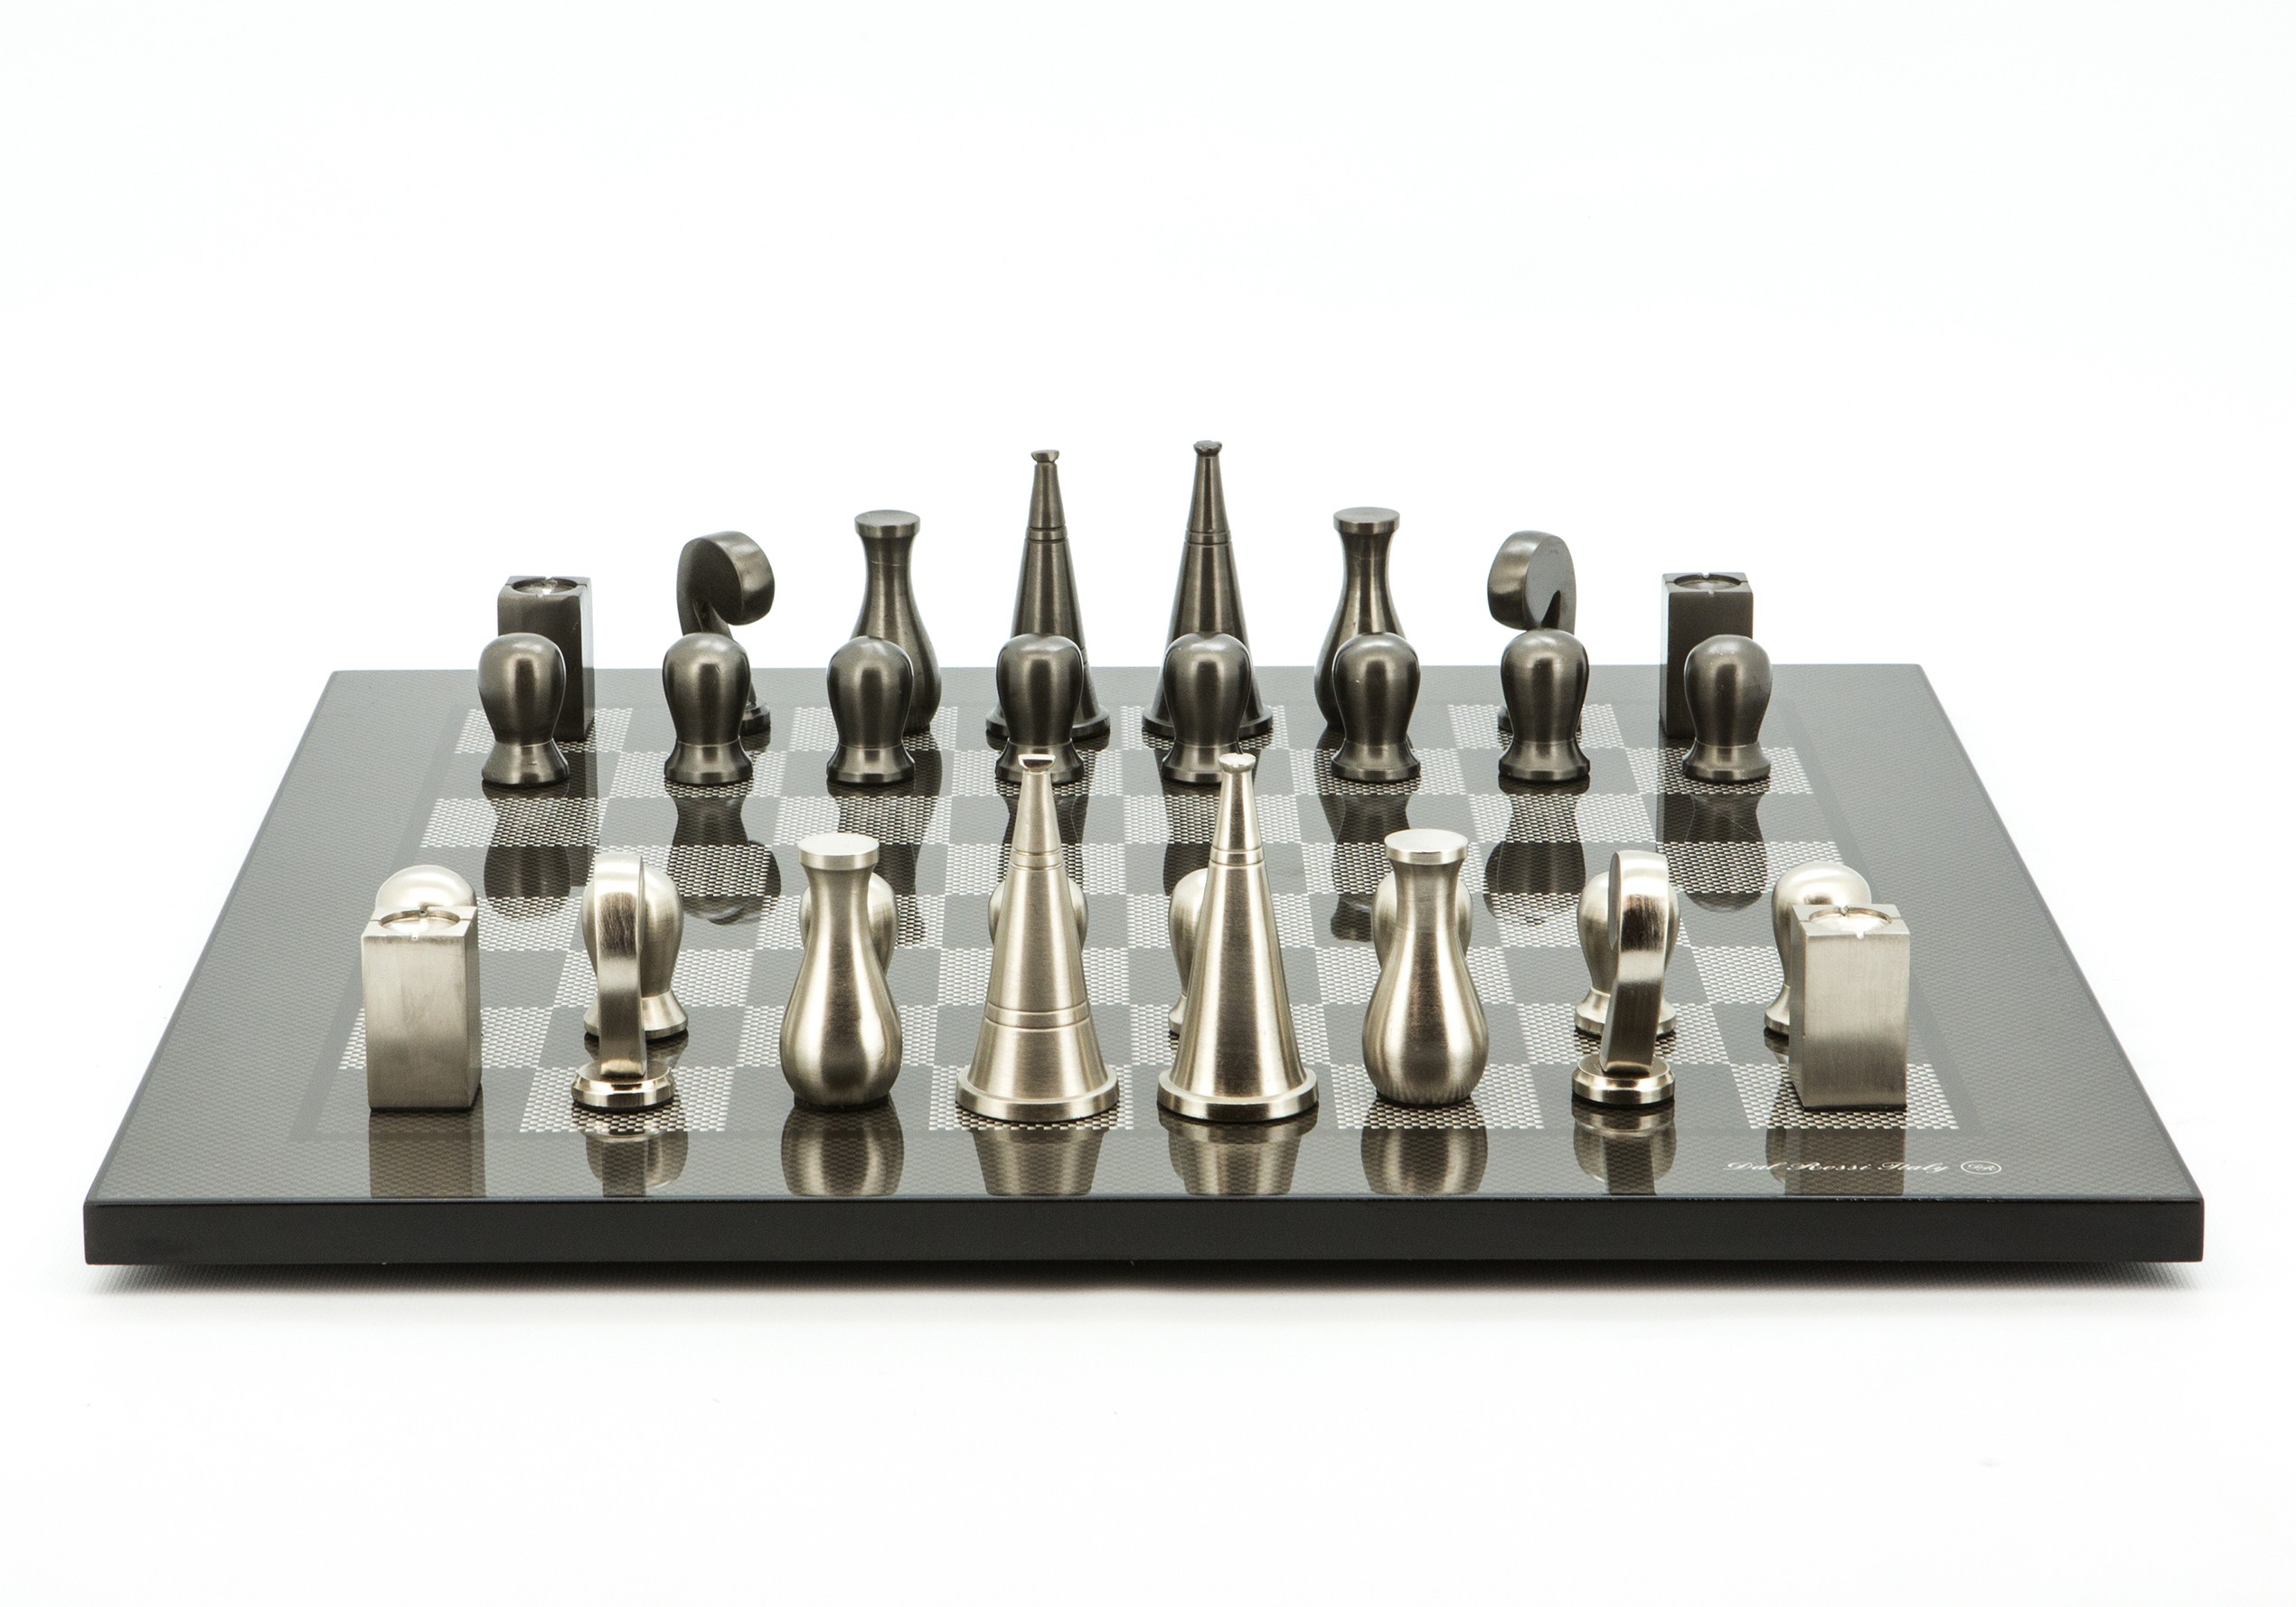 Dal Rossi Italy Chess Set Carbon Fibre Finish Flat Board 50cm, With Metal Dark Titanium and Silver 90mm Chessmen